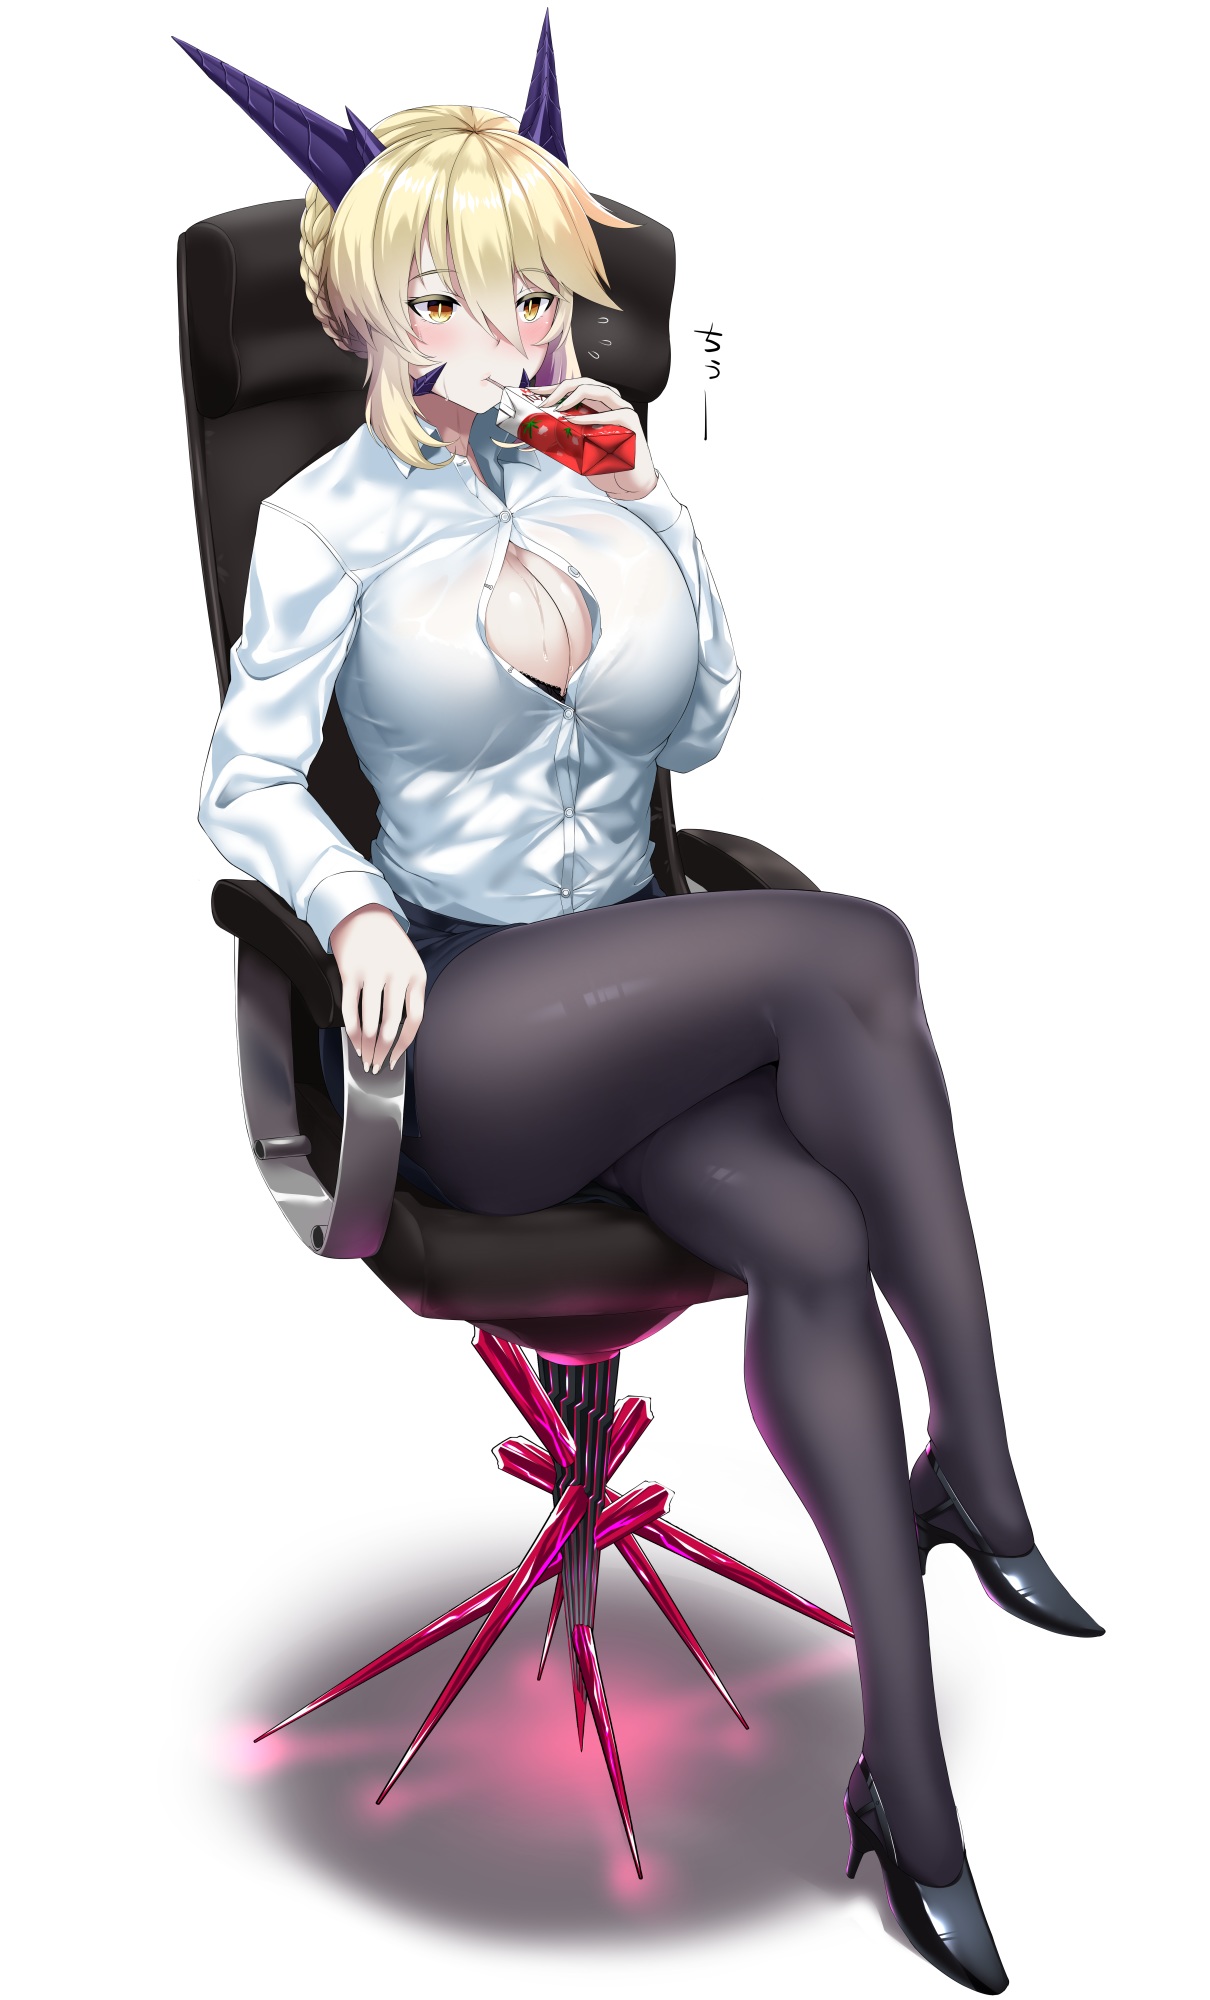 Anime 1210x2000 bra cleavage Fate/Grand Order heels horns open shirt pantyhose white background anime girls eating office girl Fate series 2D big boobs huge breasts